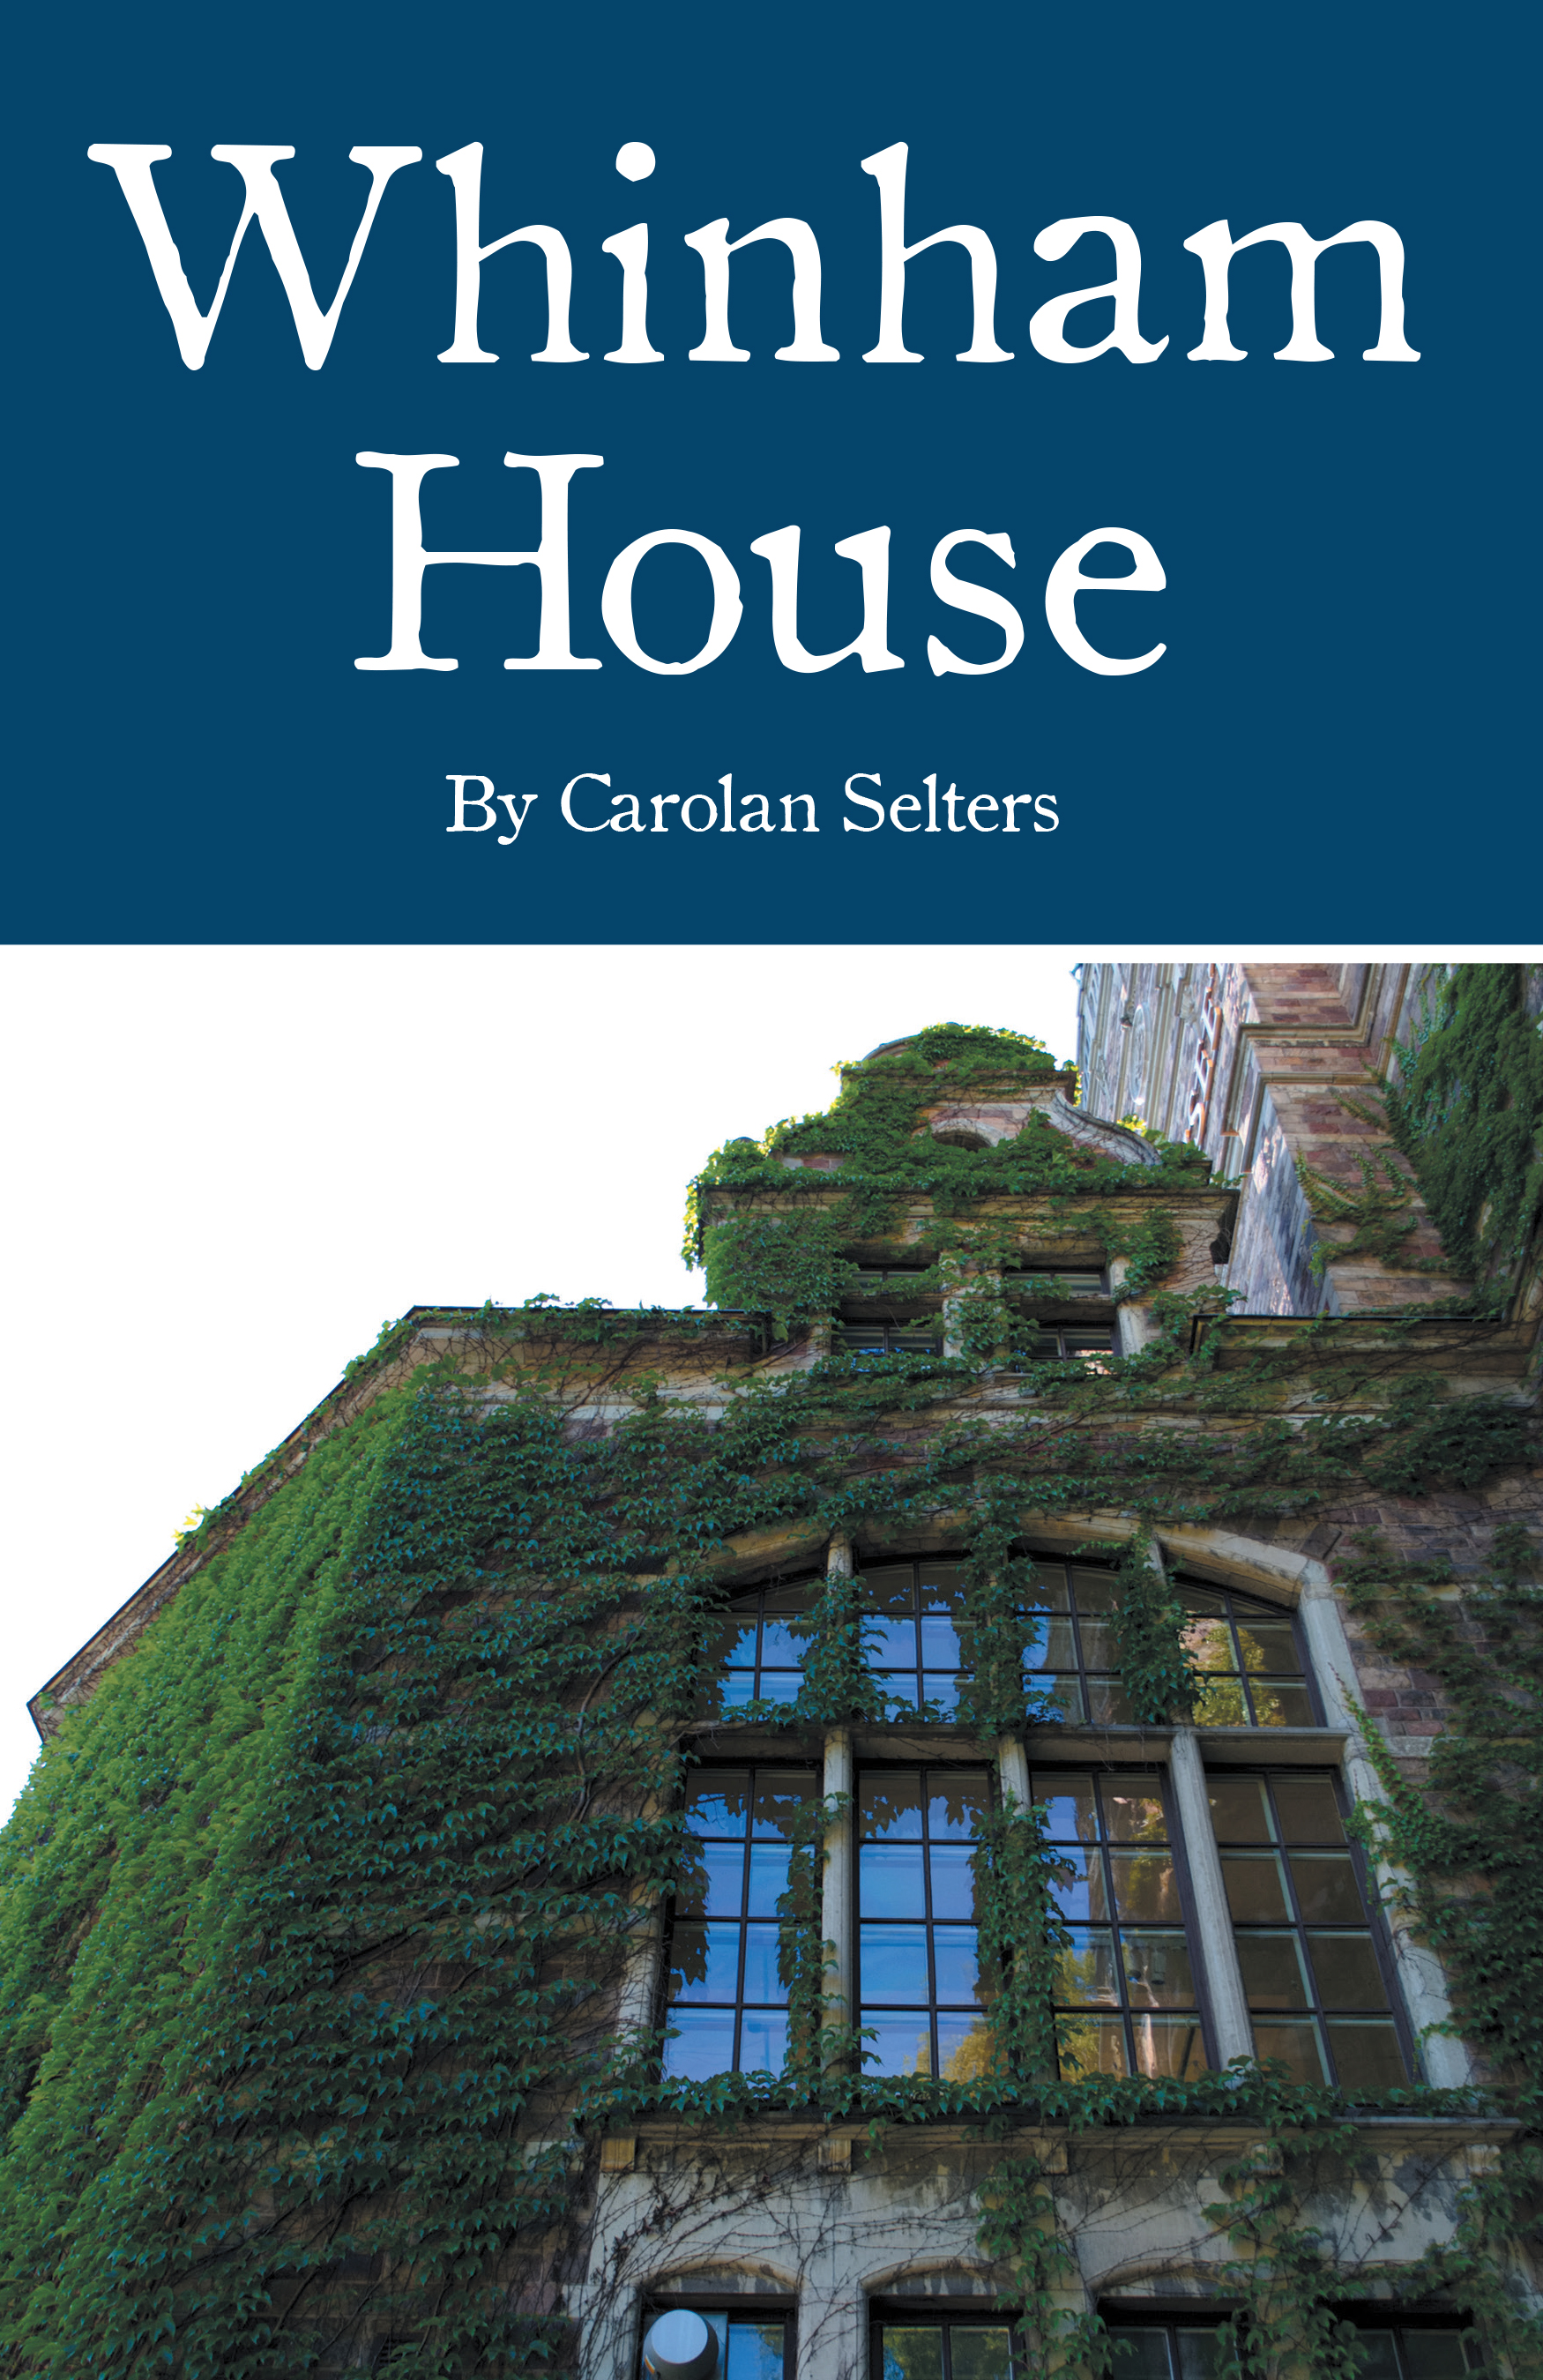 Author Carolan Selters’s New Book, "Whinham House," Follows a Newlywed Couple Who Discover Their Honeymoon Destination at an English Manor is Actually Haunted